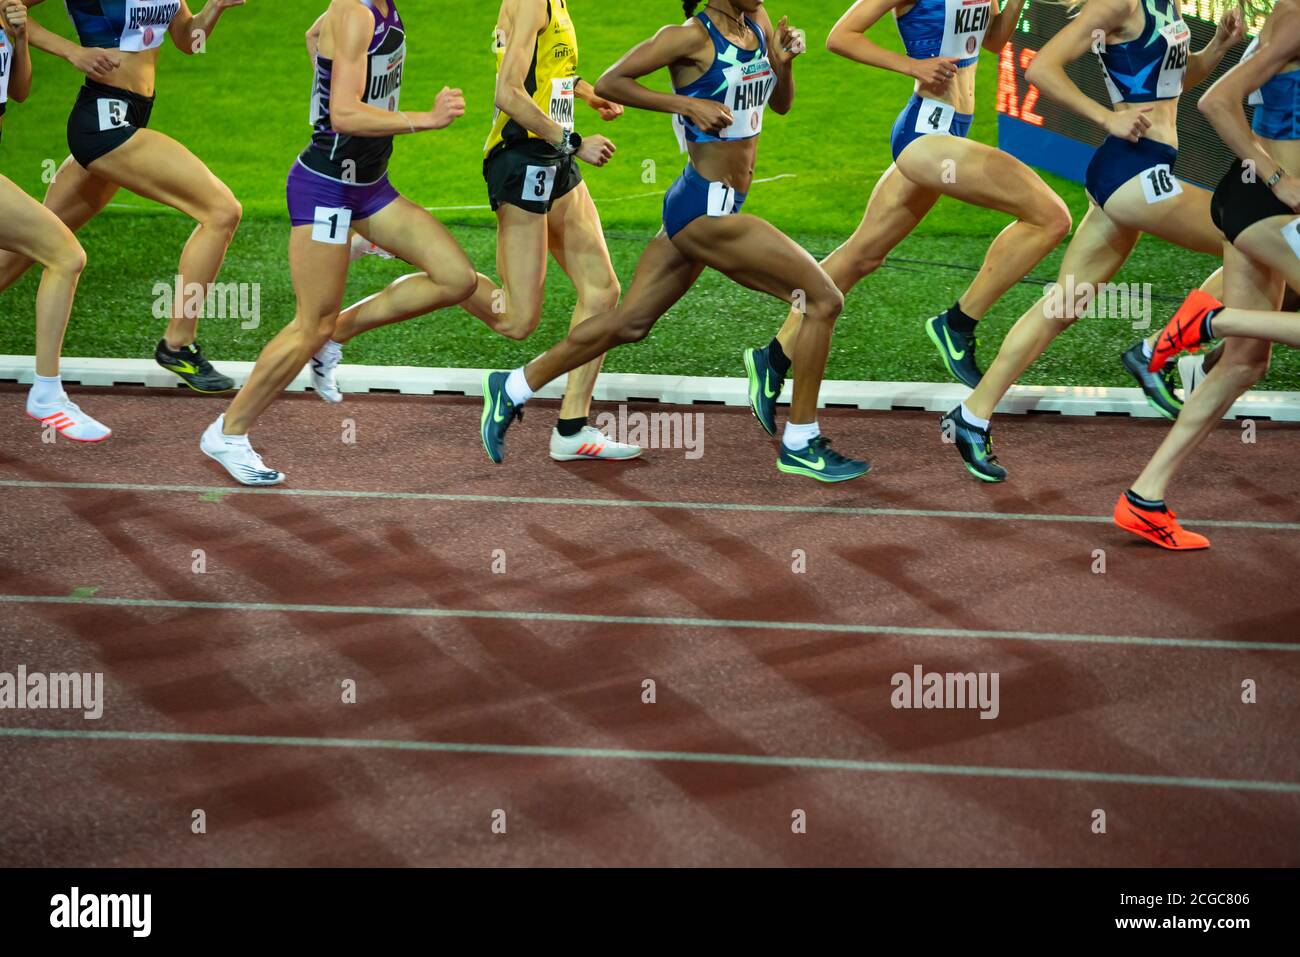 OSTRAVA, CZECH SEPTEMBER. 8. 2020: Legs of professional athletes on track and field race wearing controversial Nike running shoes. Air Zoom Stock Photo - Alamy